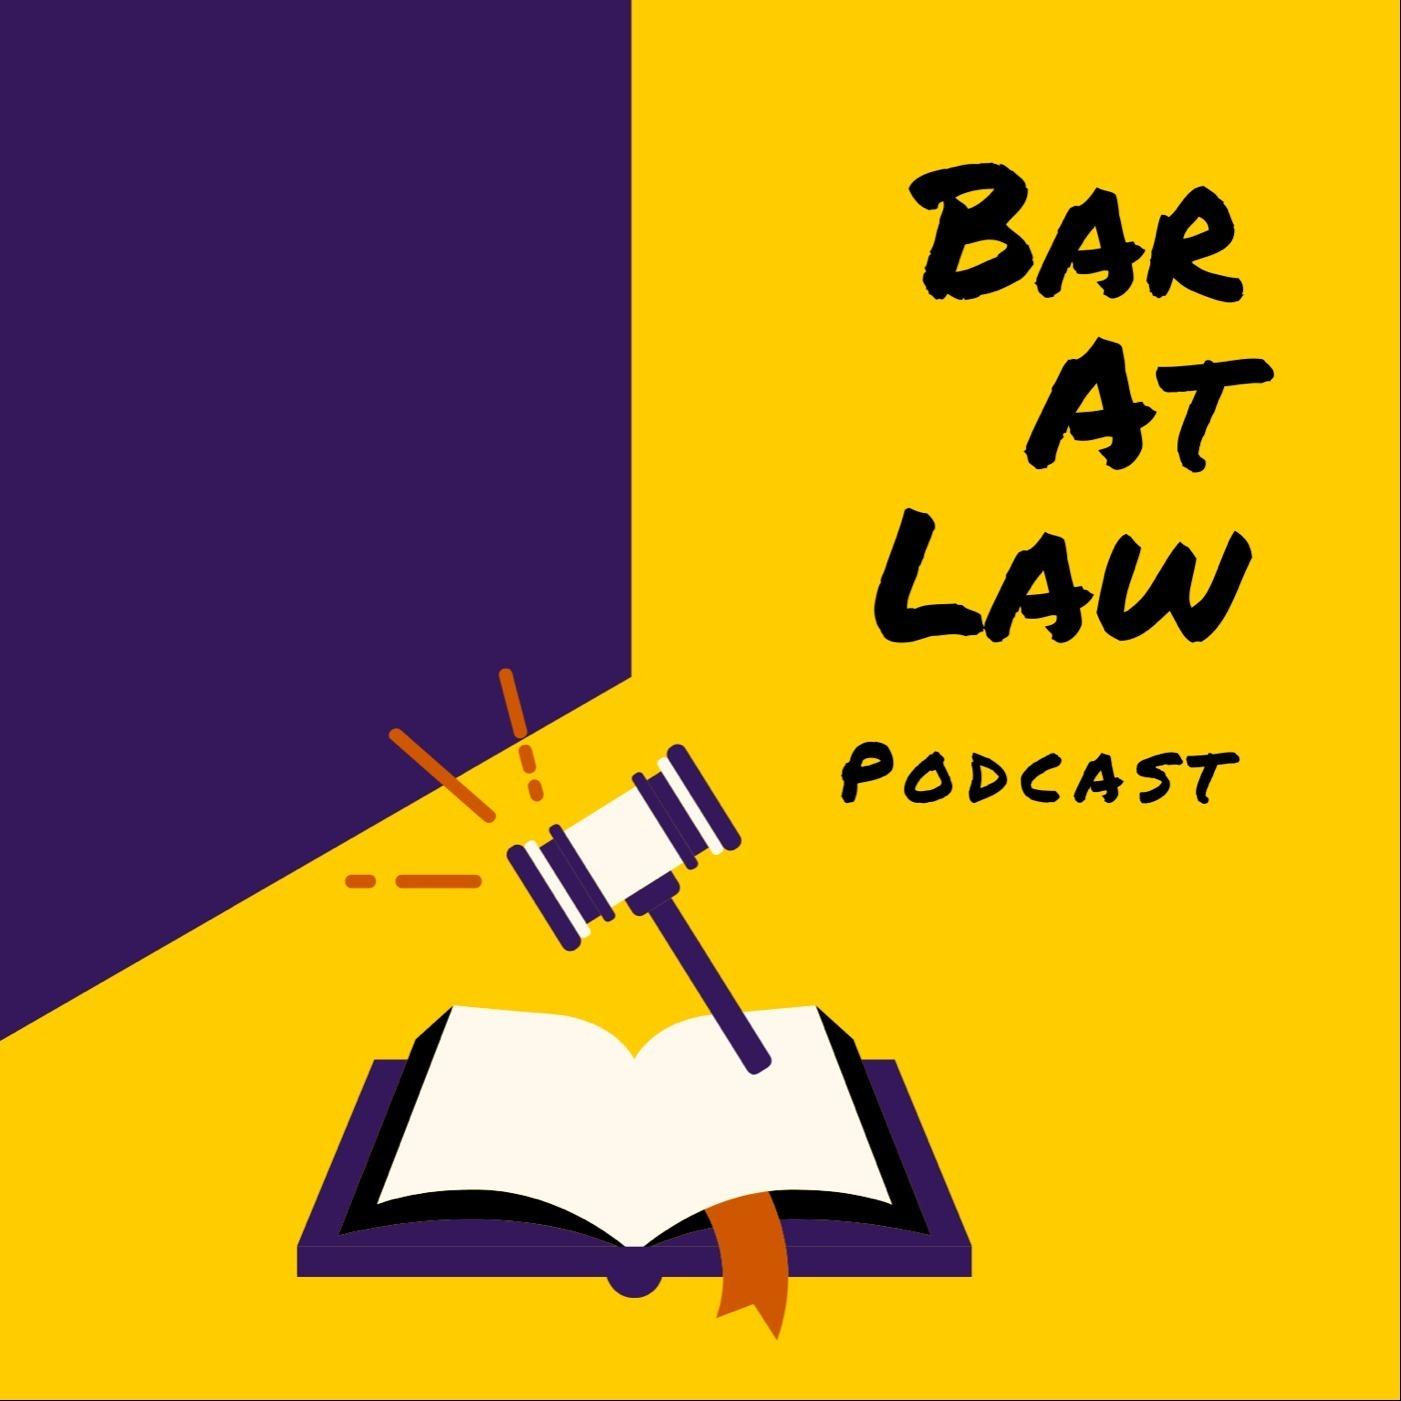 Bar at Law podcast